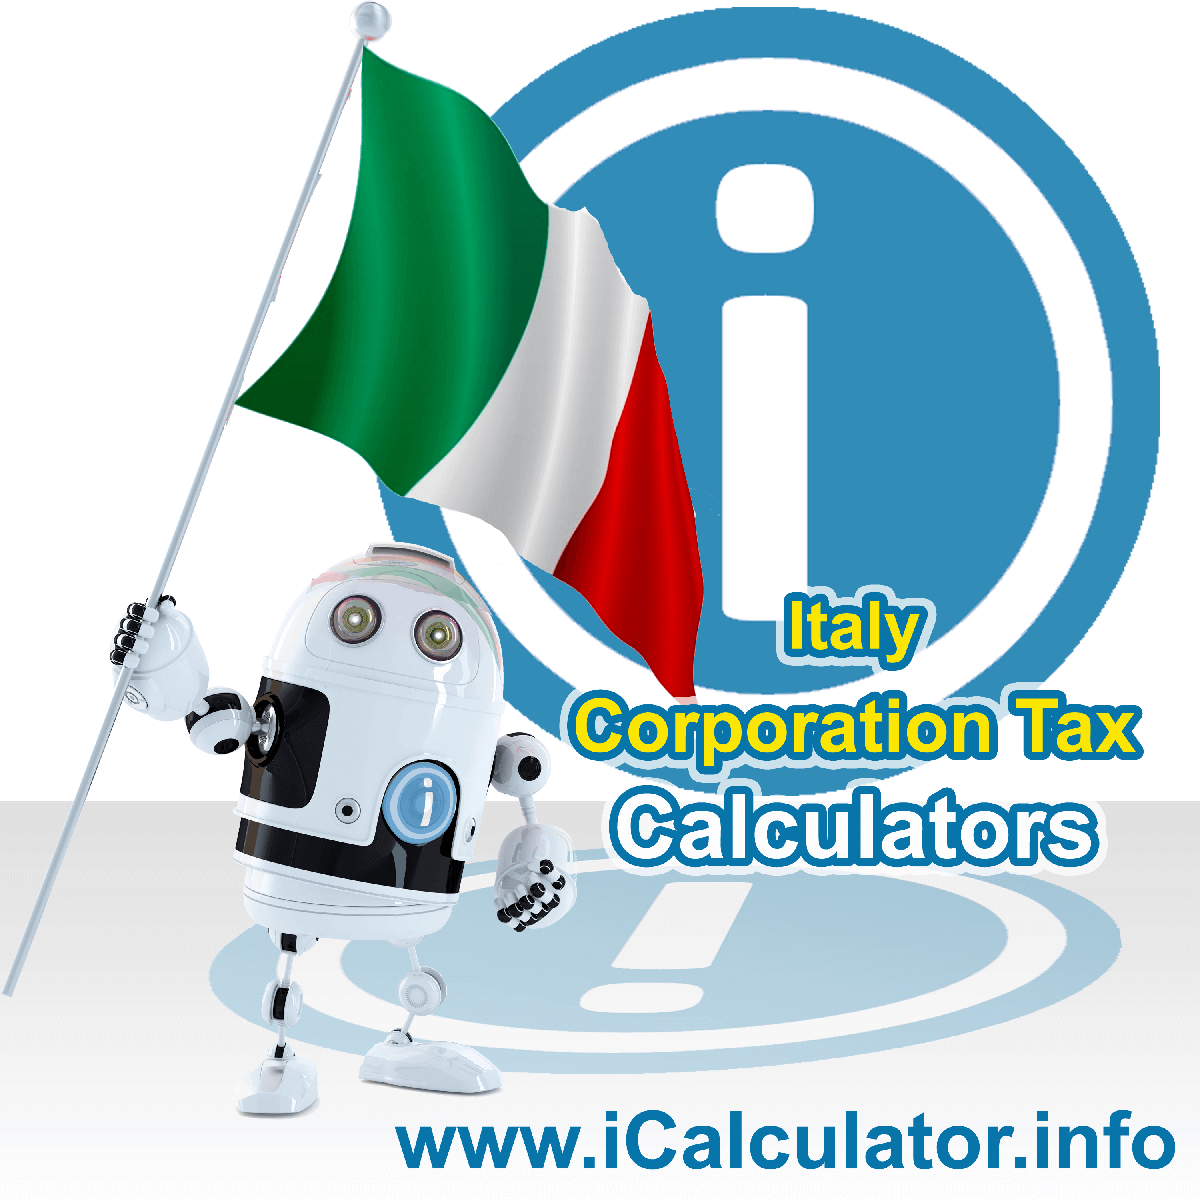 Italy Corporation Tax Calculator. This image shows the Italy flag and information relating to the corporation tax rate formula used for calculating Corporation Tax in Italy using the Italy Corporation Tax Calculator in 2023